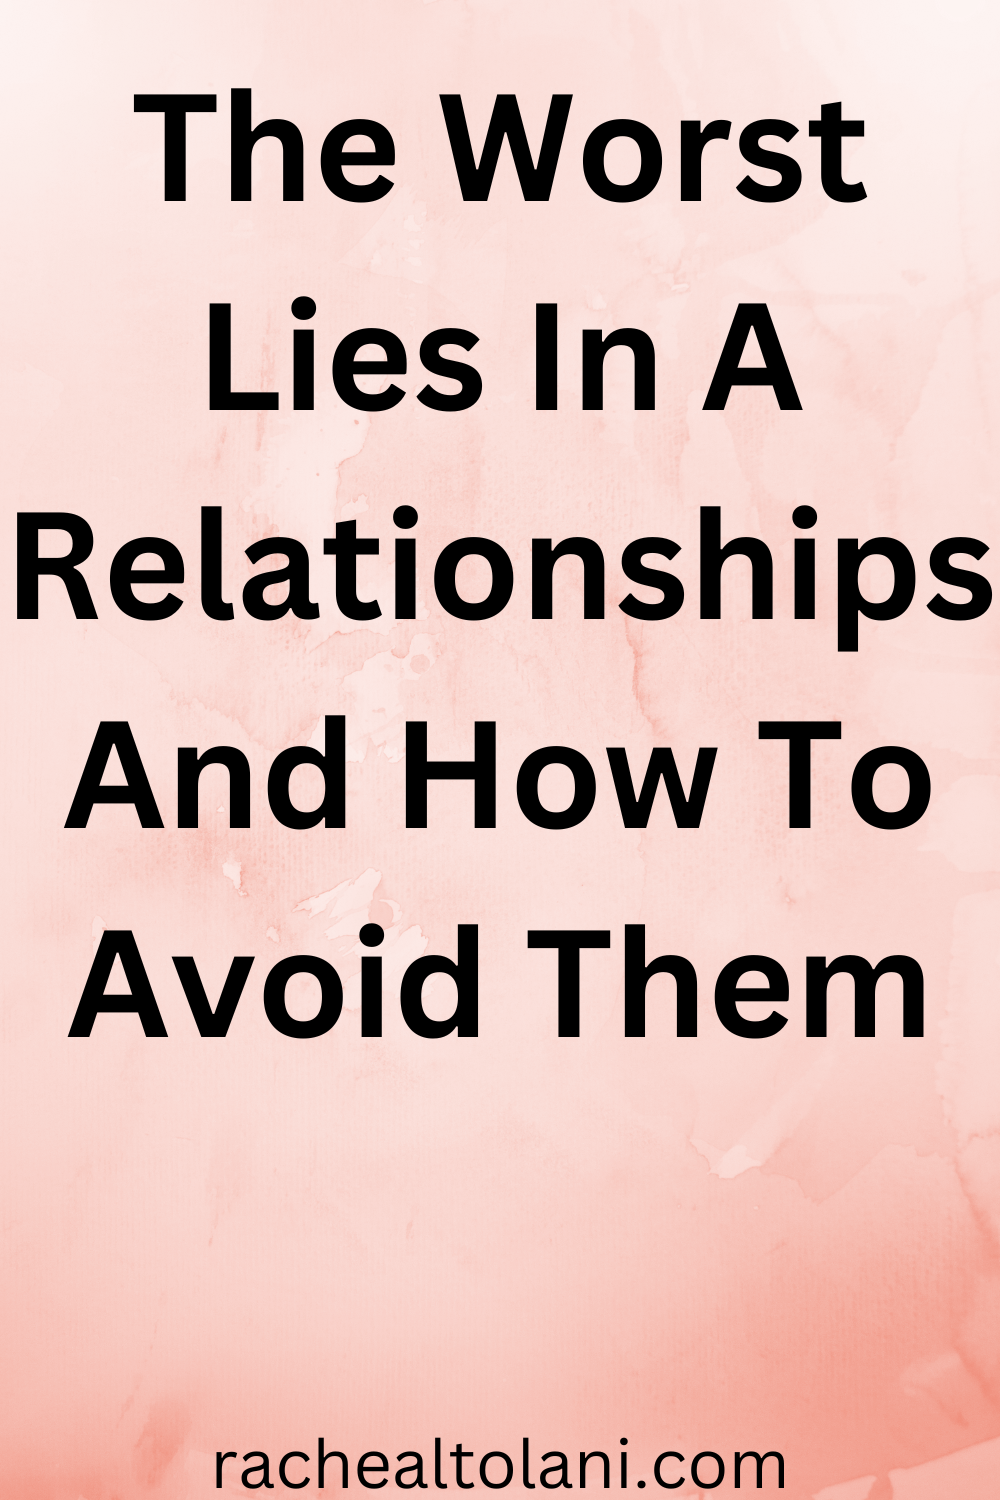 Worst lies in a relationship